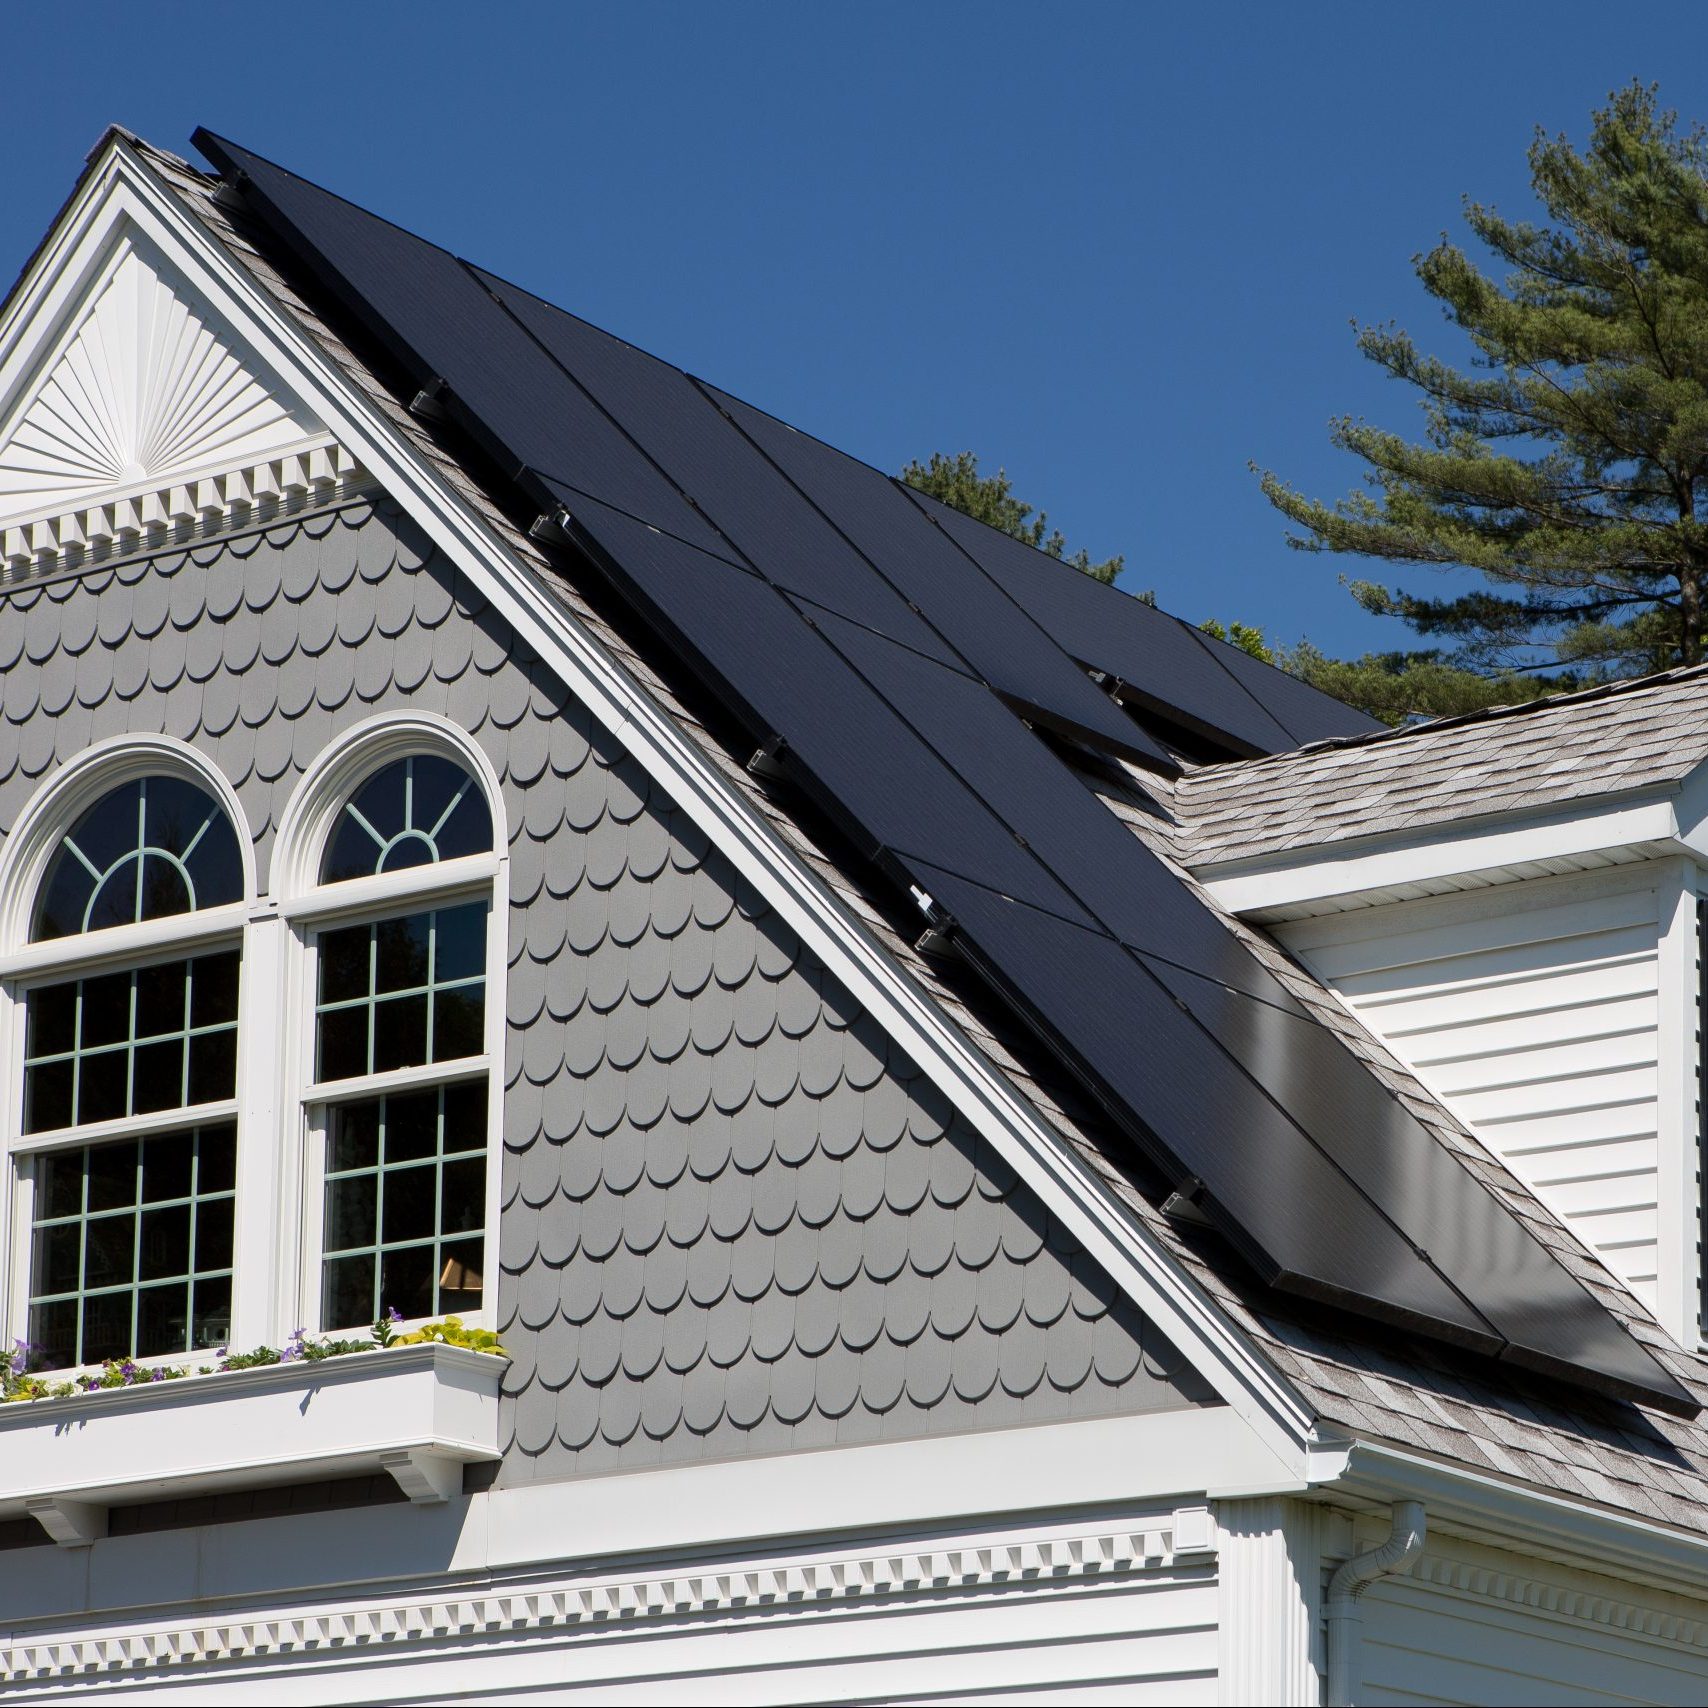 A beautiful home with an affordable solar power system